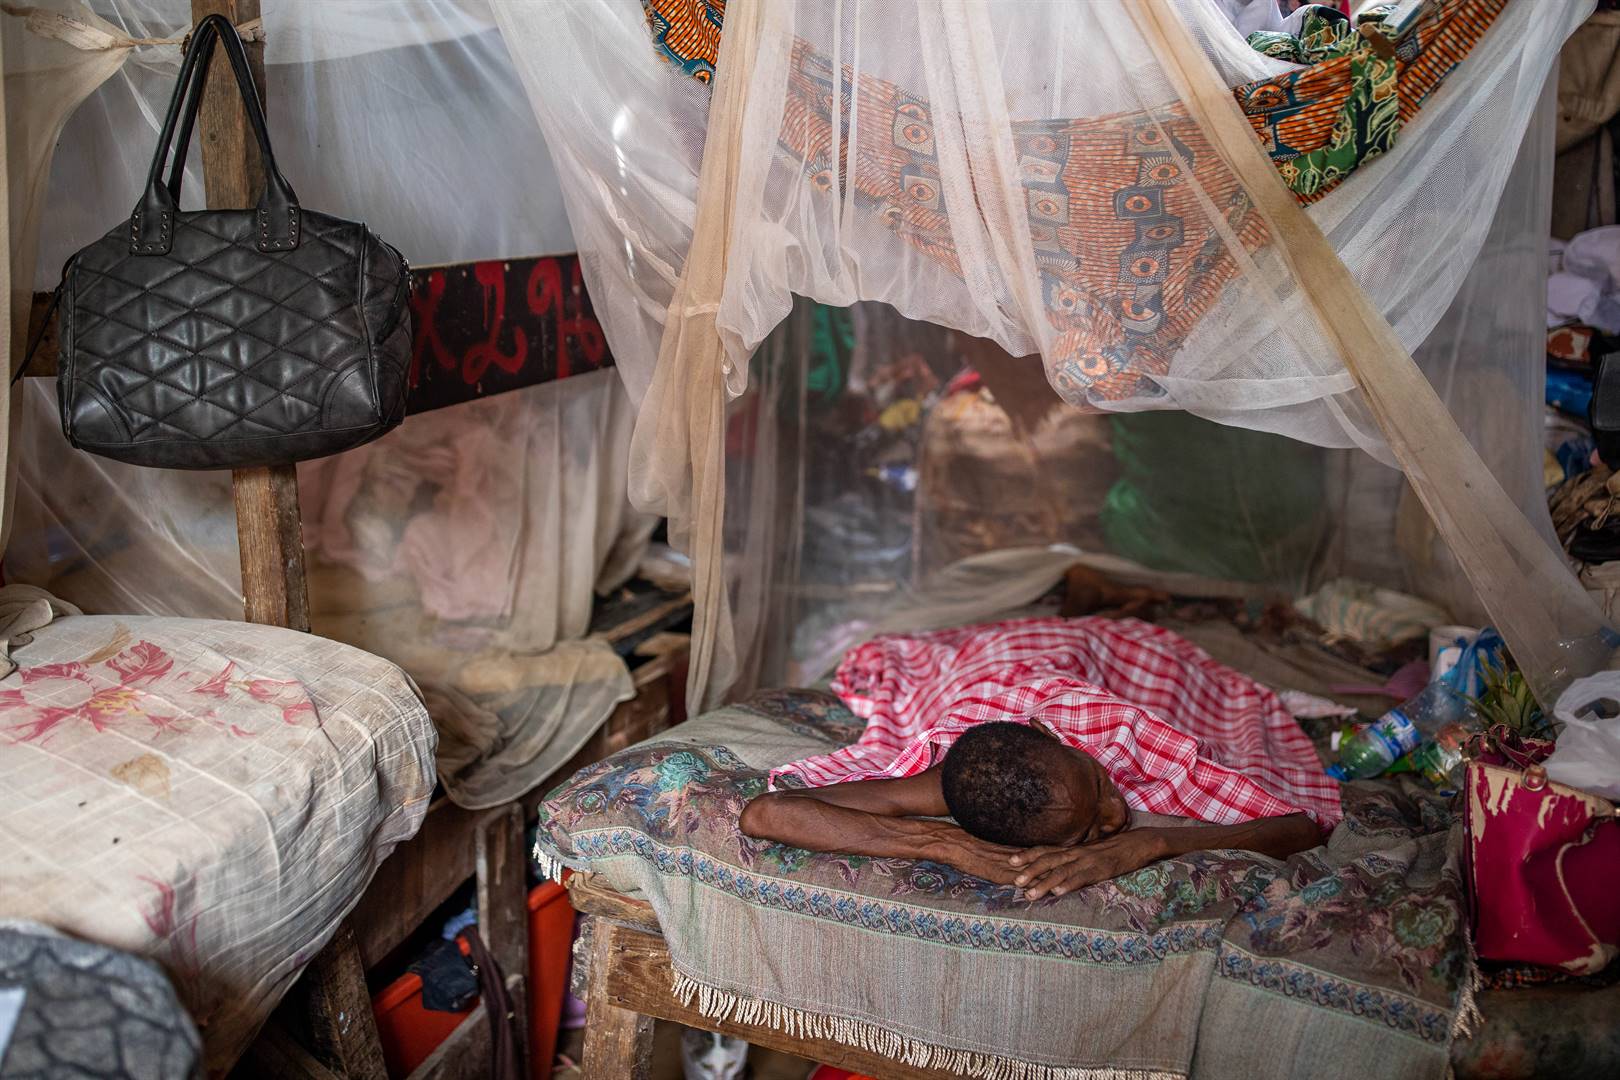 Covid-19 disruptions caused surge in malaria deaths, says WHO | News24